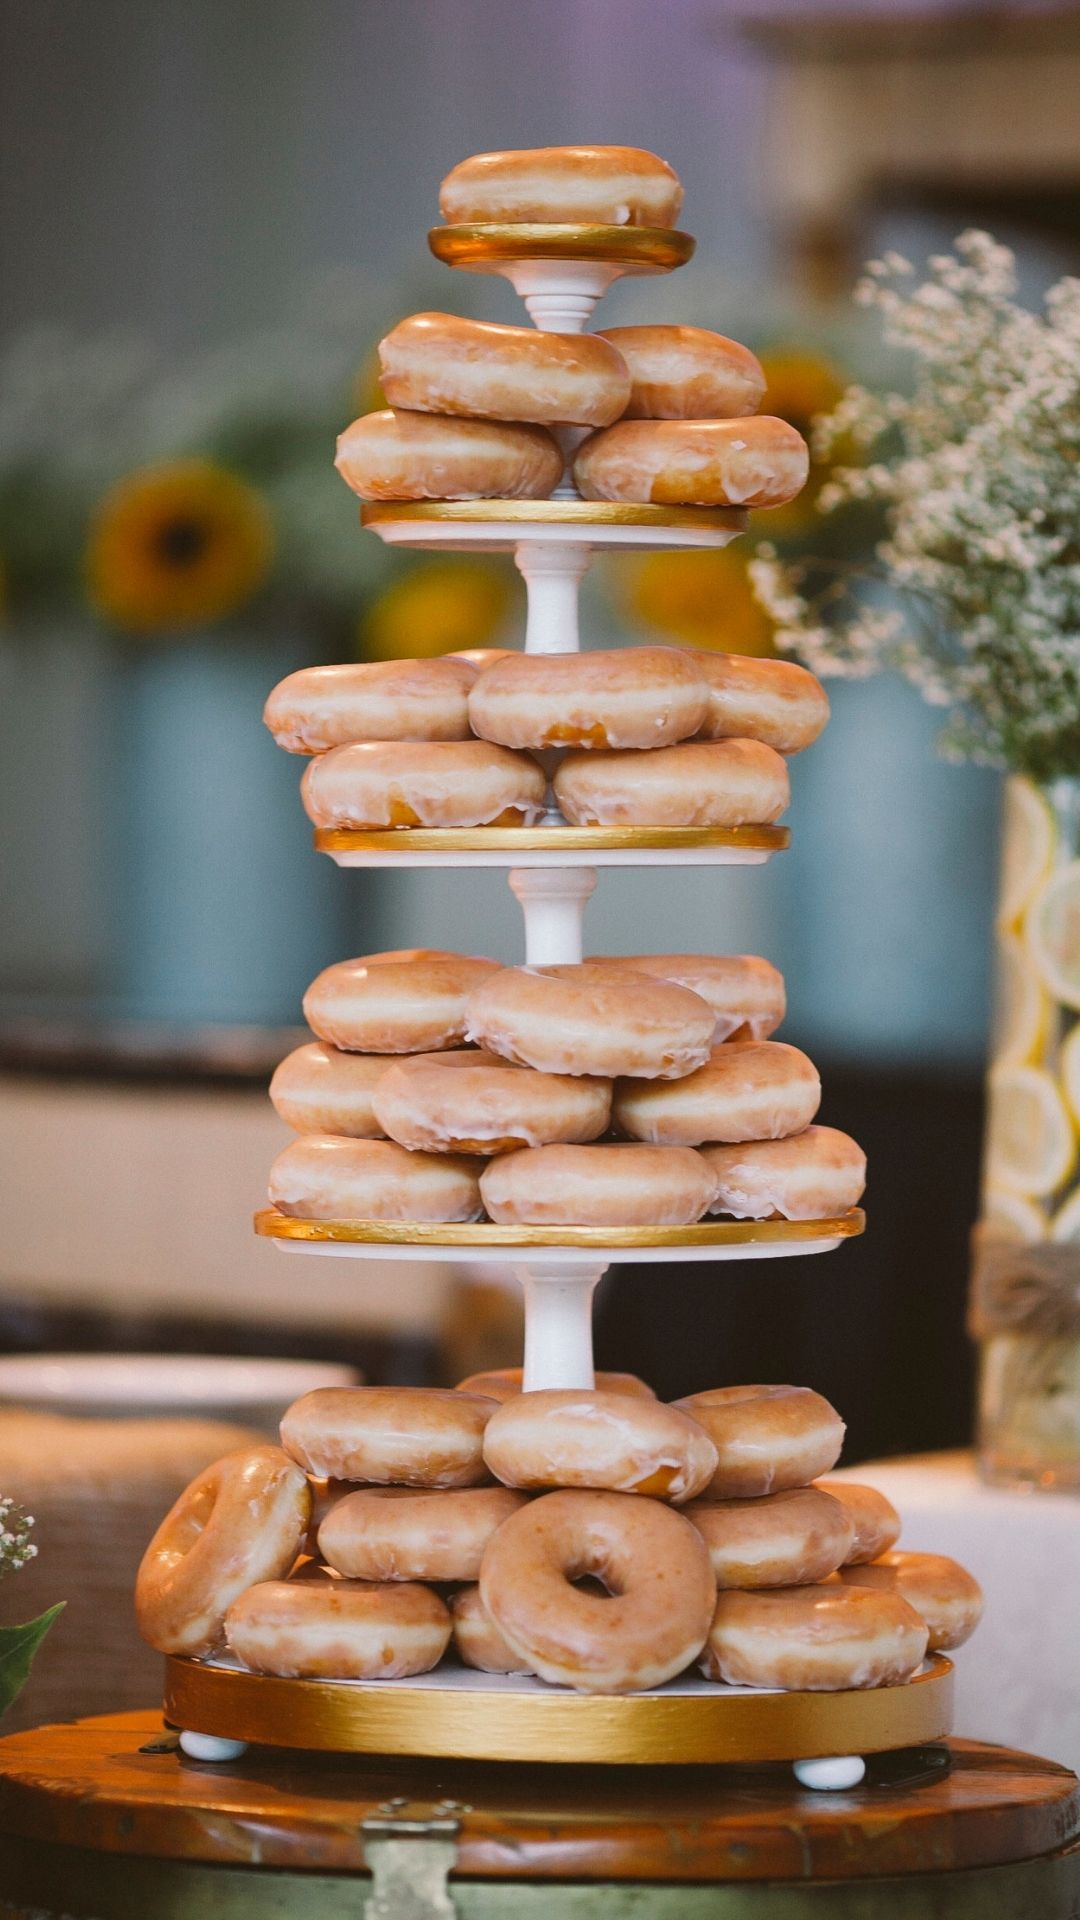 Donuts wedding cake trends 2021